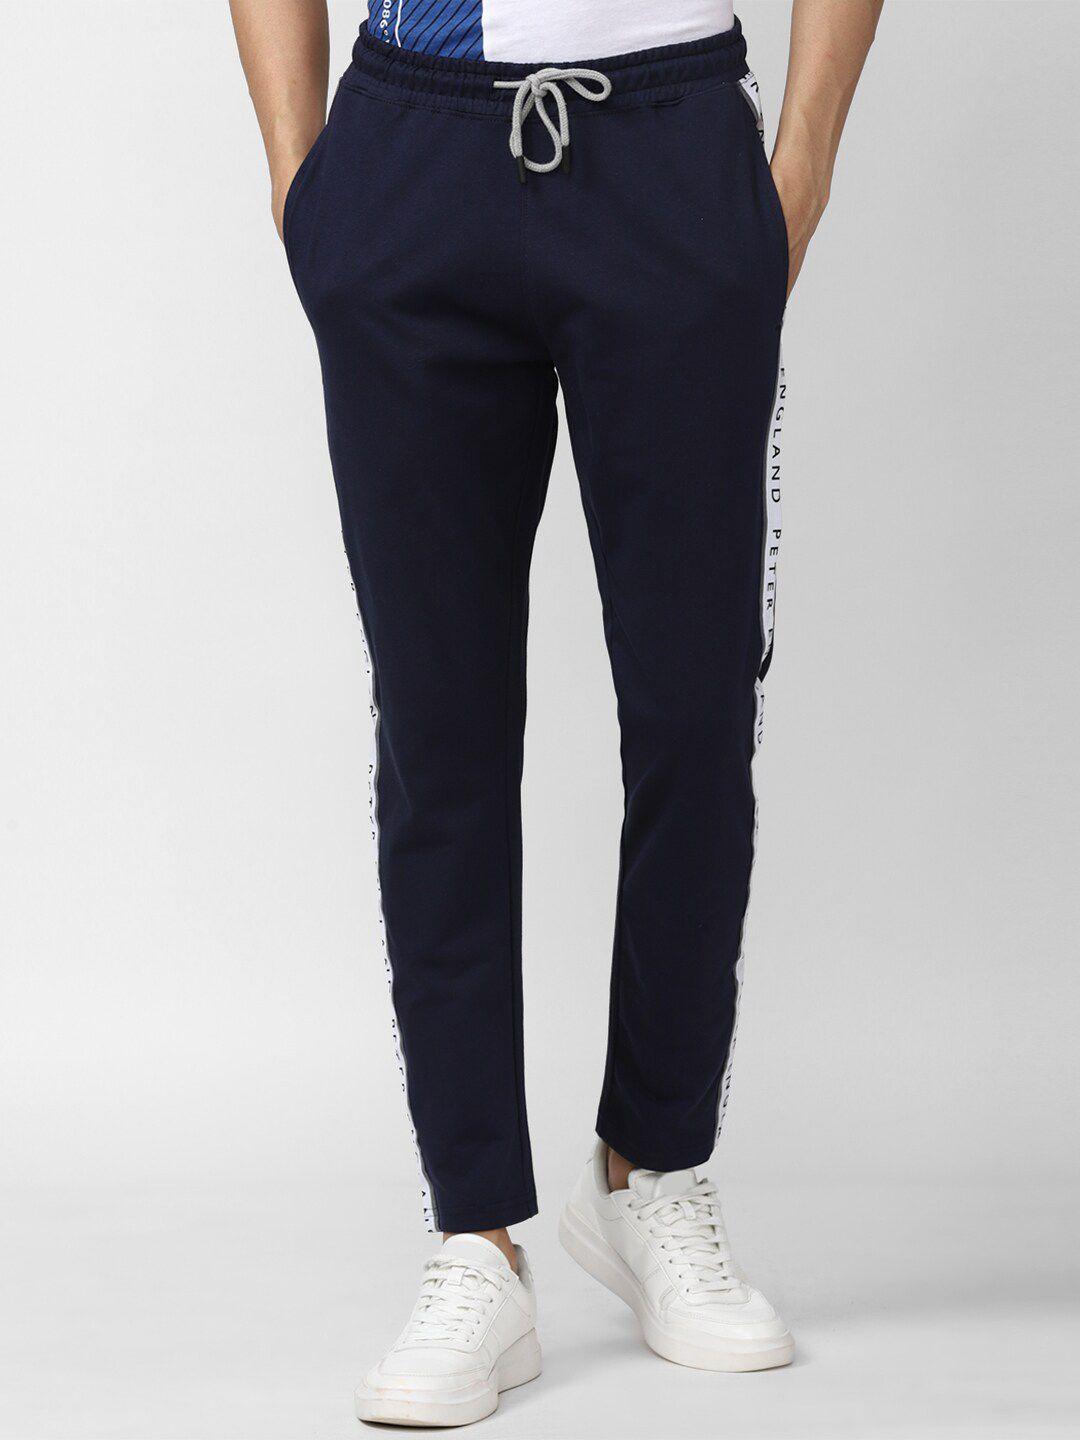 peter england men navy blue solid pure cotton track pants